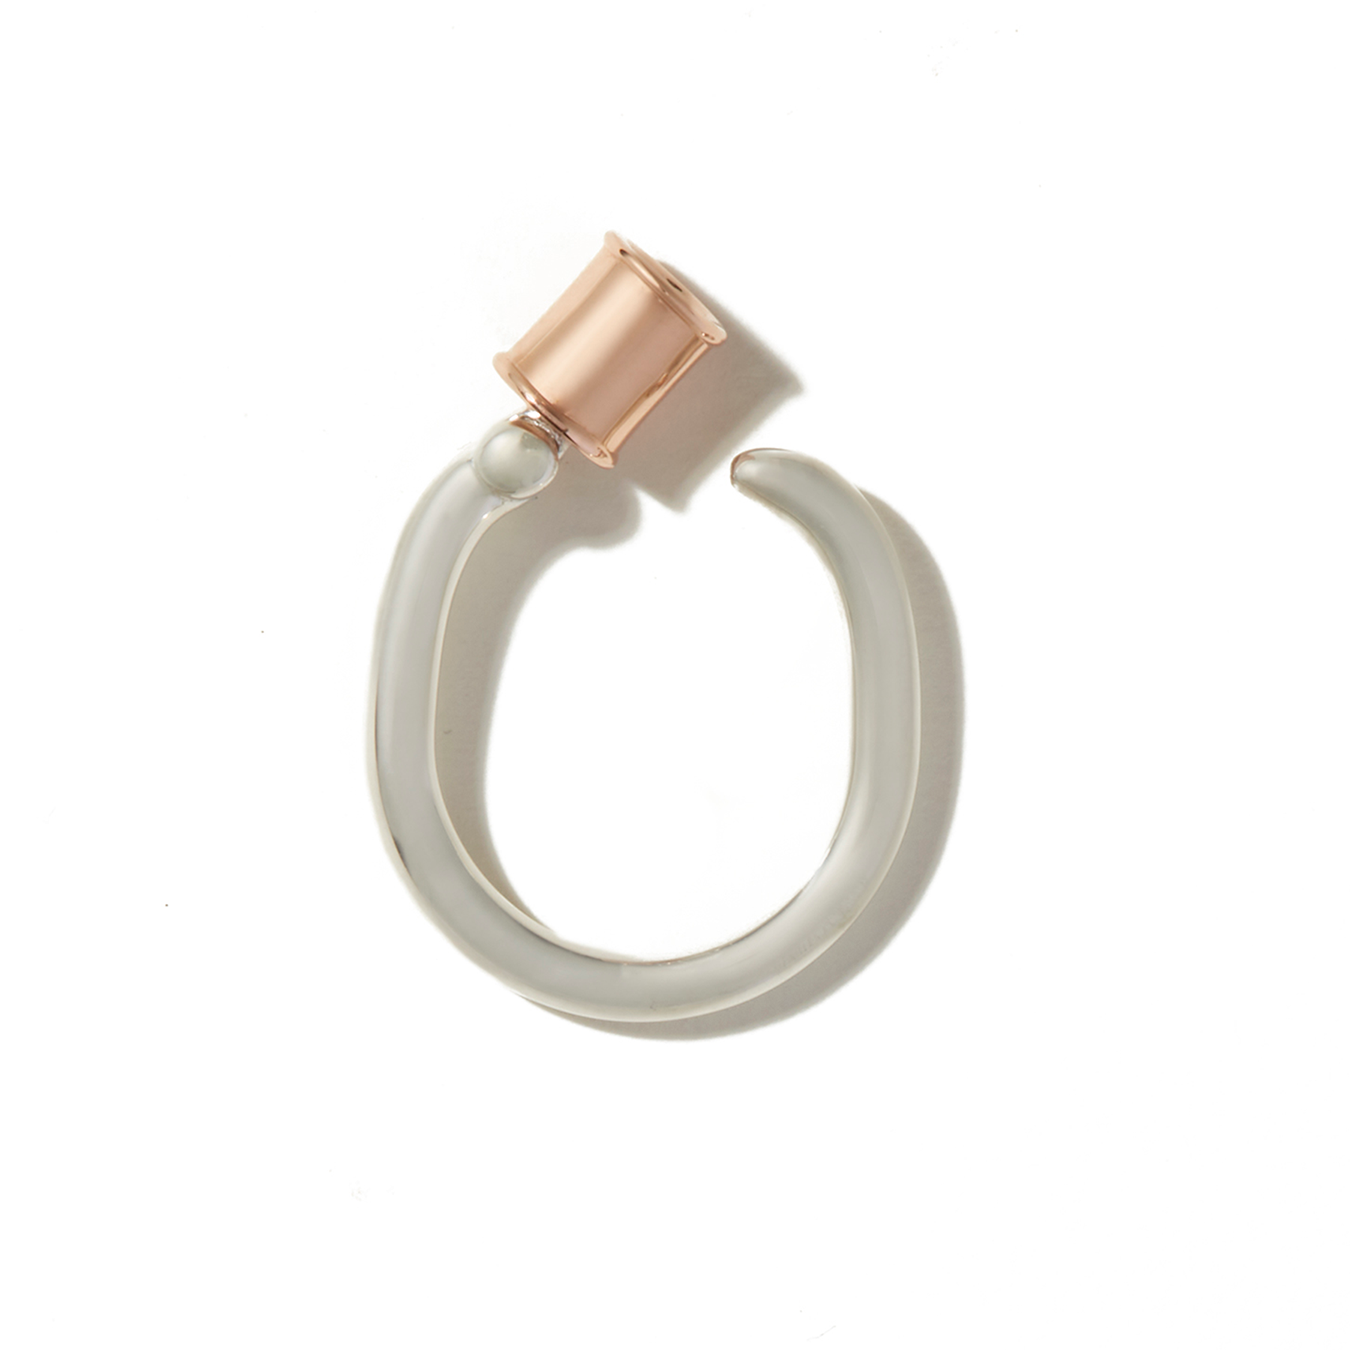 Silver trundle lock ring with rose gold clasp